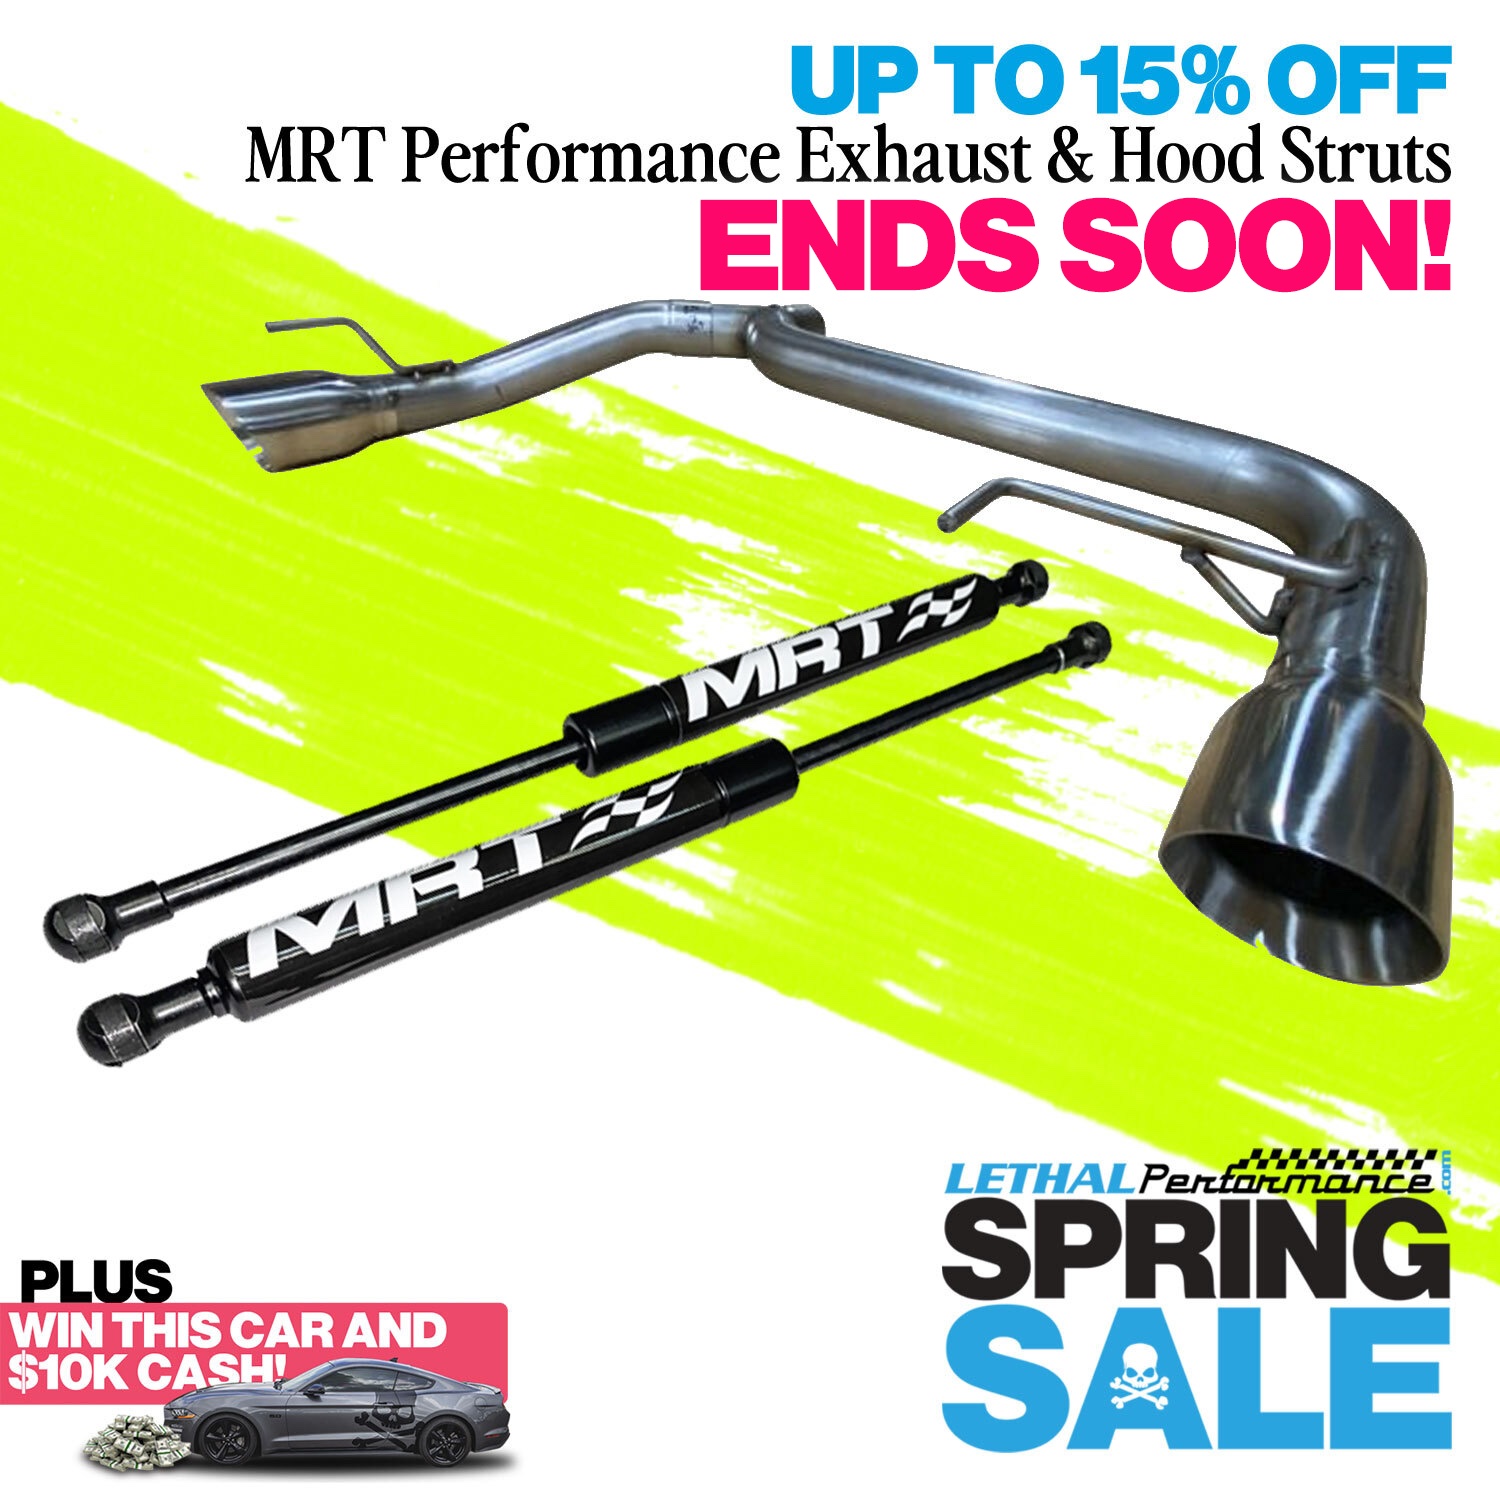 S650 Mustang Spring SALE has SPRUNG here at Lethal Performance!! end soon spring sale mrt